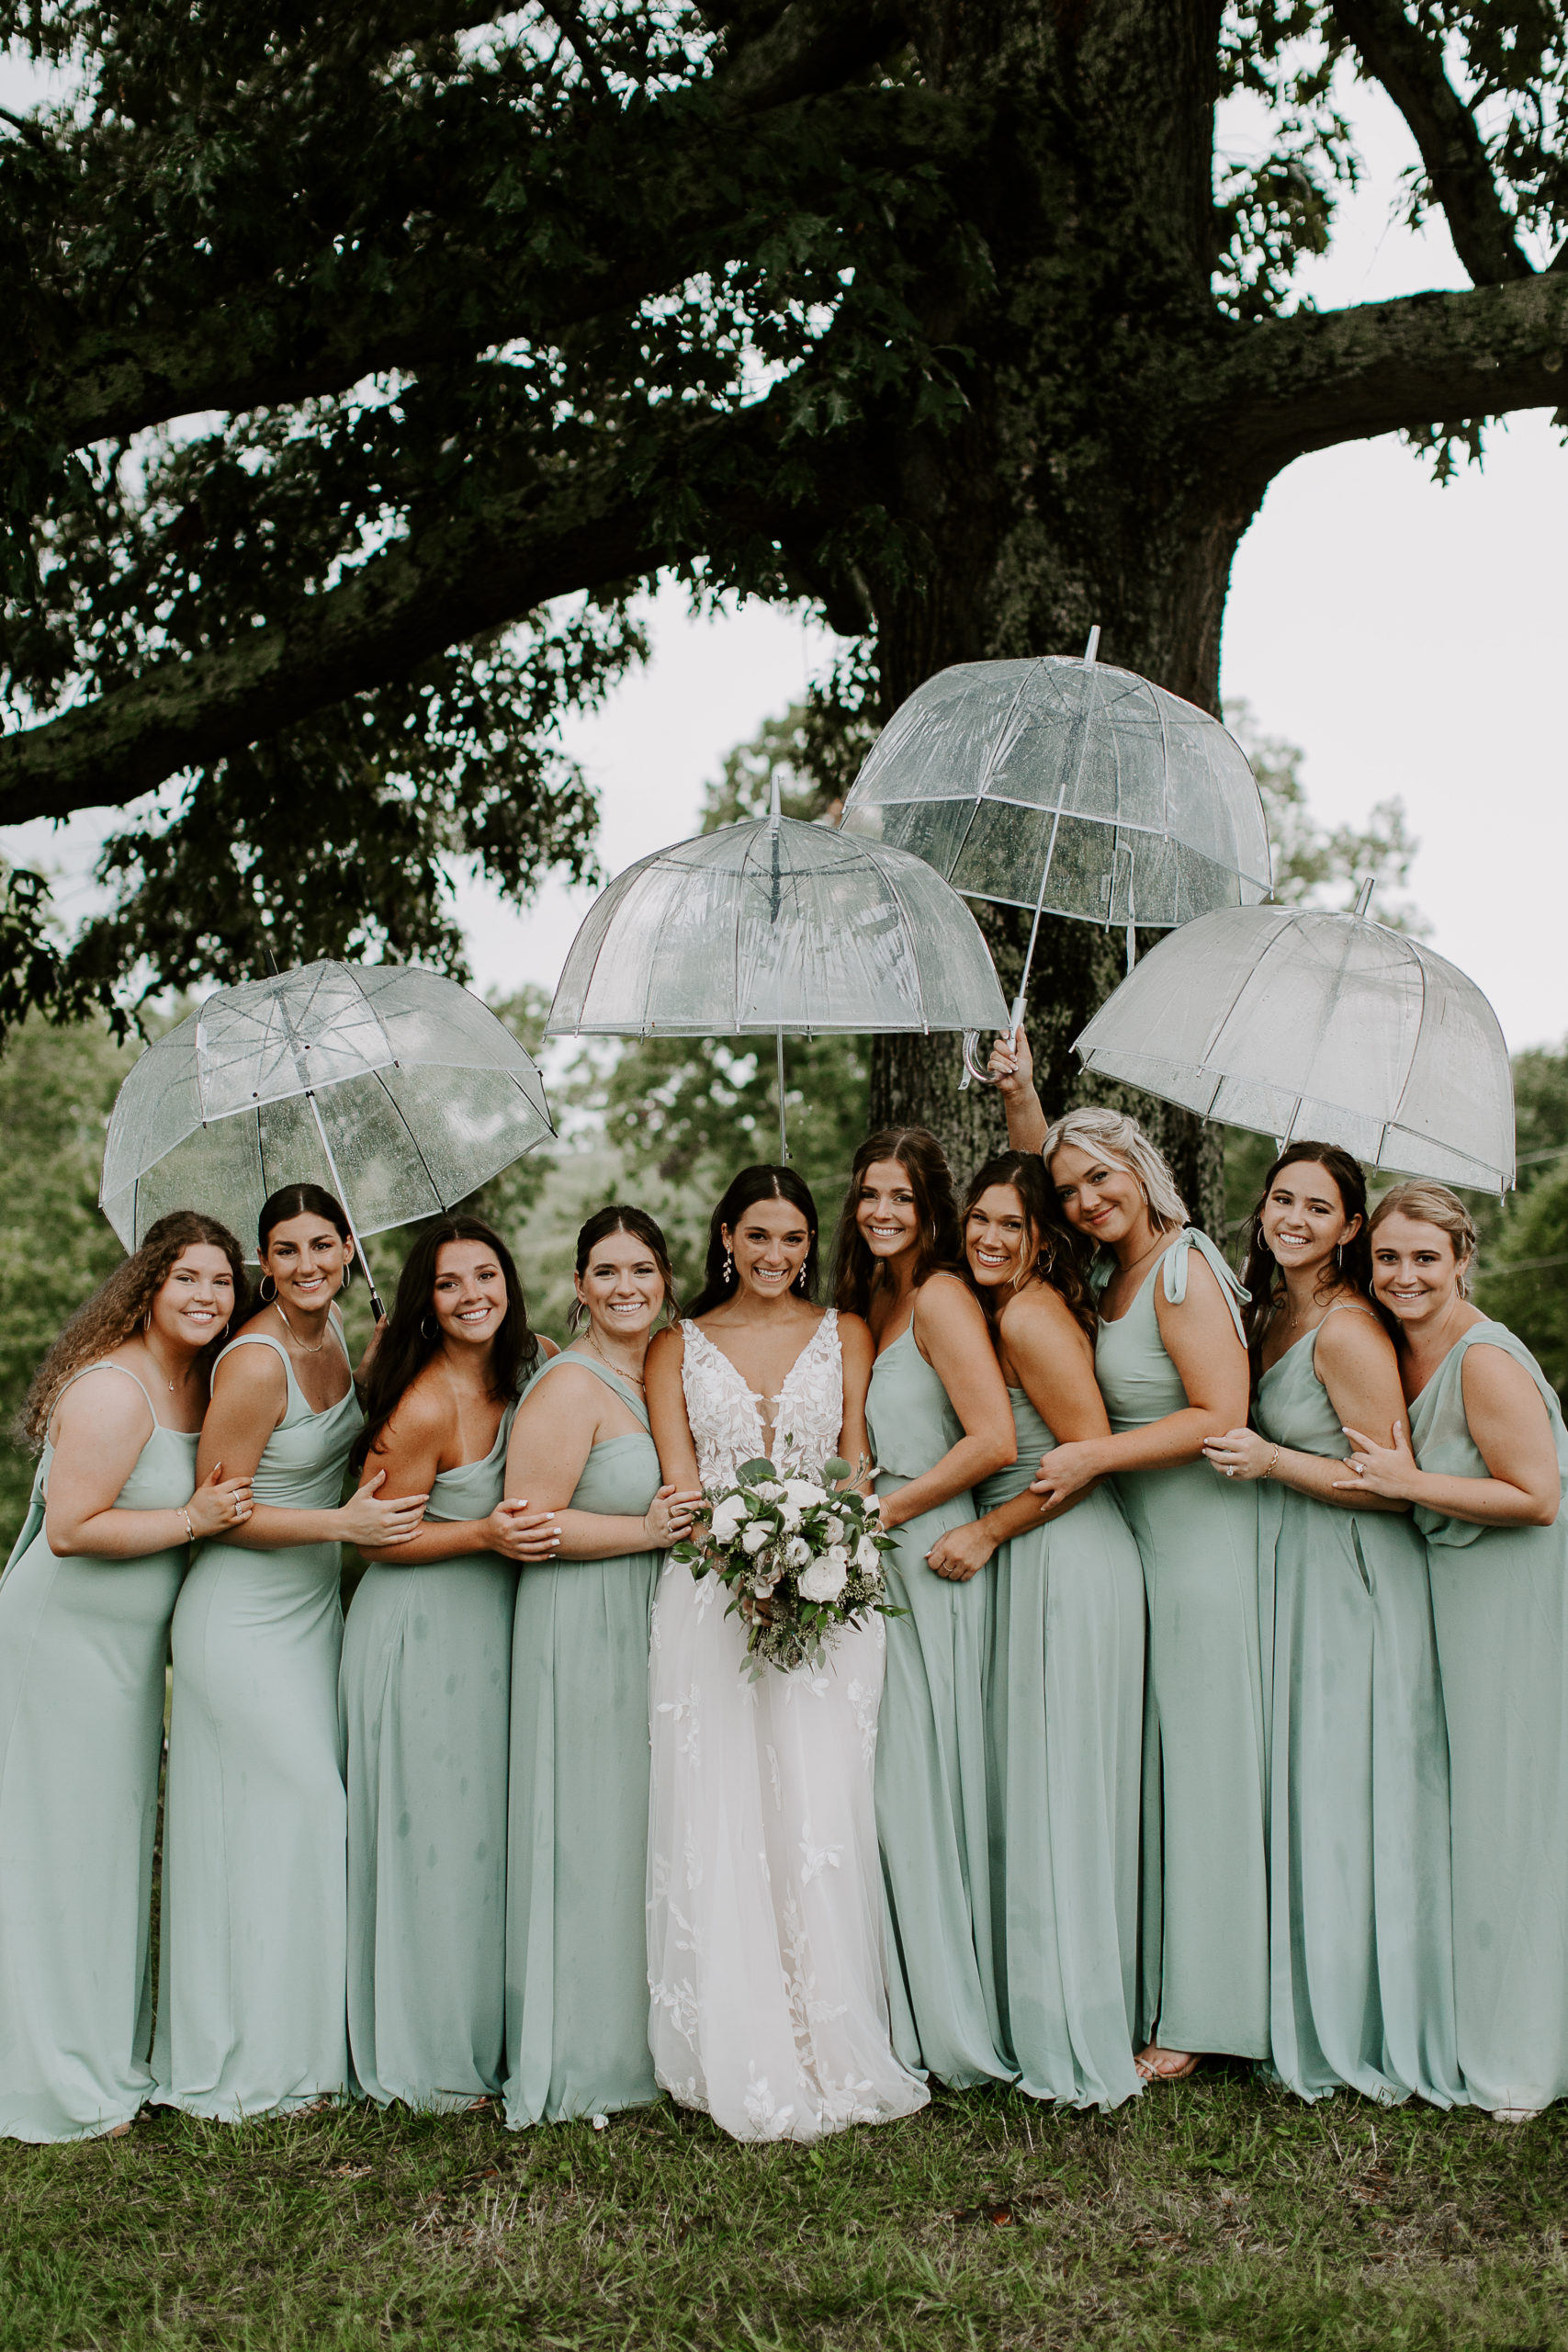 Woman standing in the middle of her bridesmaids as they all lean into her and hold clear umbrellas over their heads during a rainy wedding